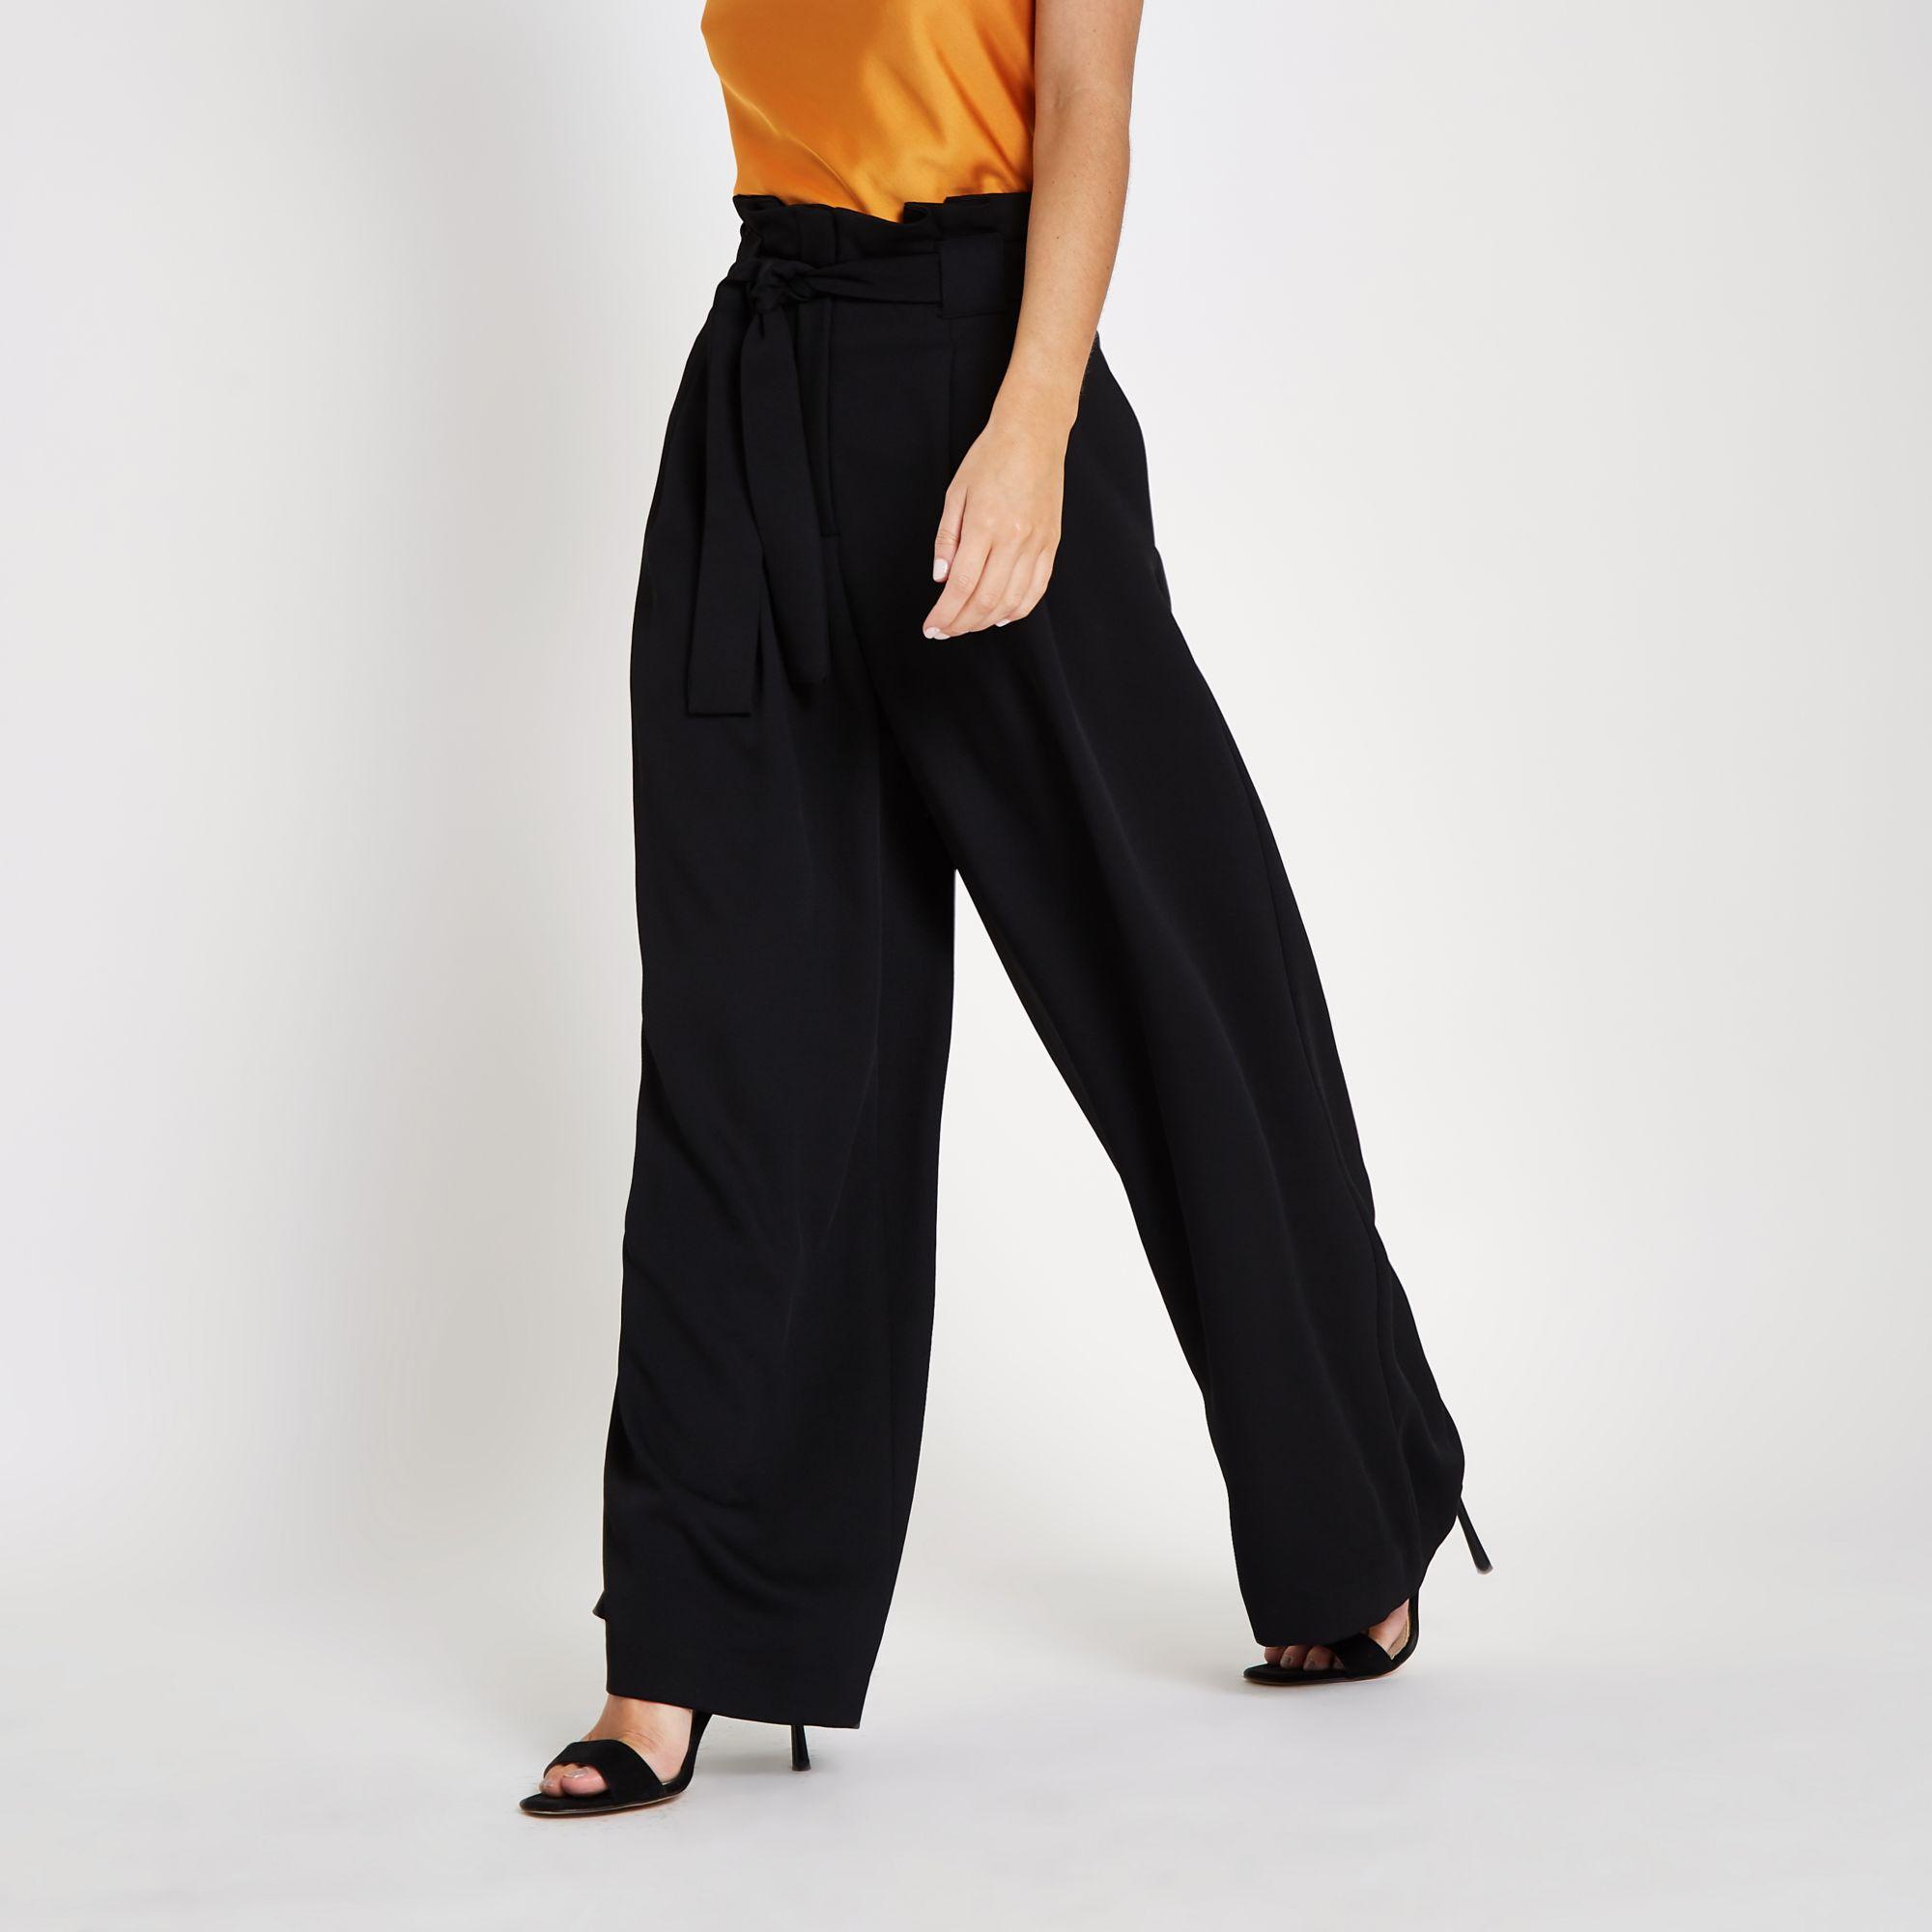 River Island Synthetic Petite Paperbag Waist Wide Leg Trousers in Black -  Lyst